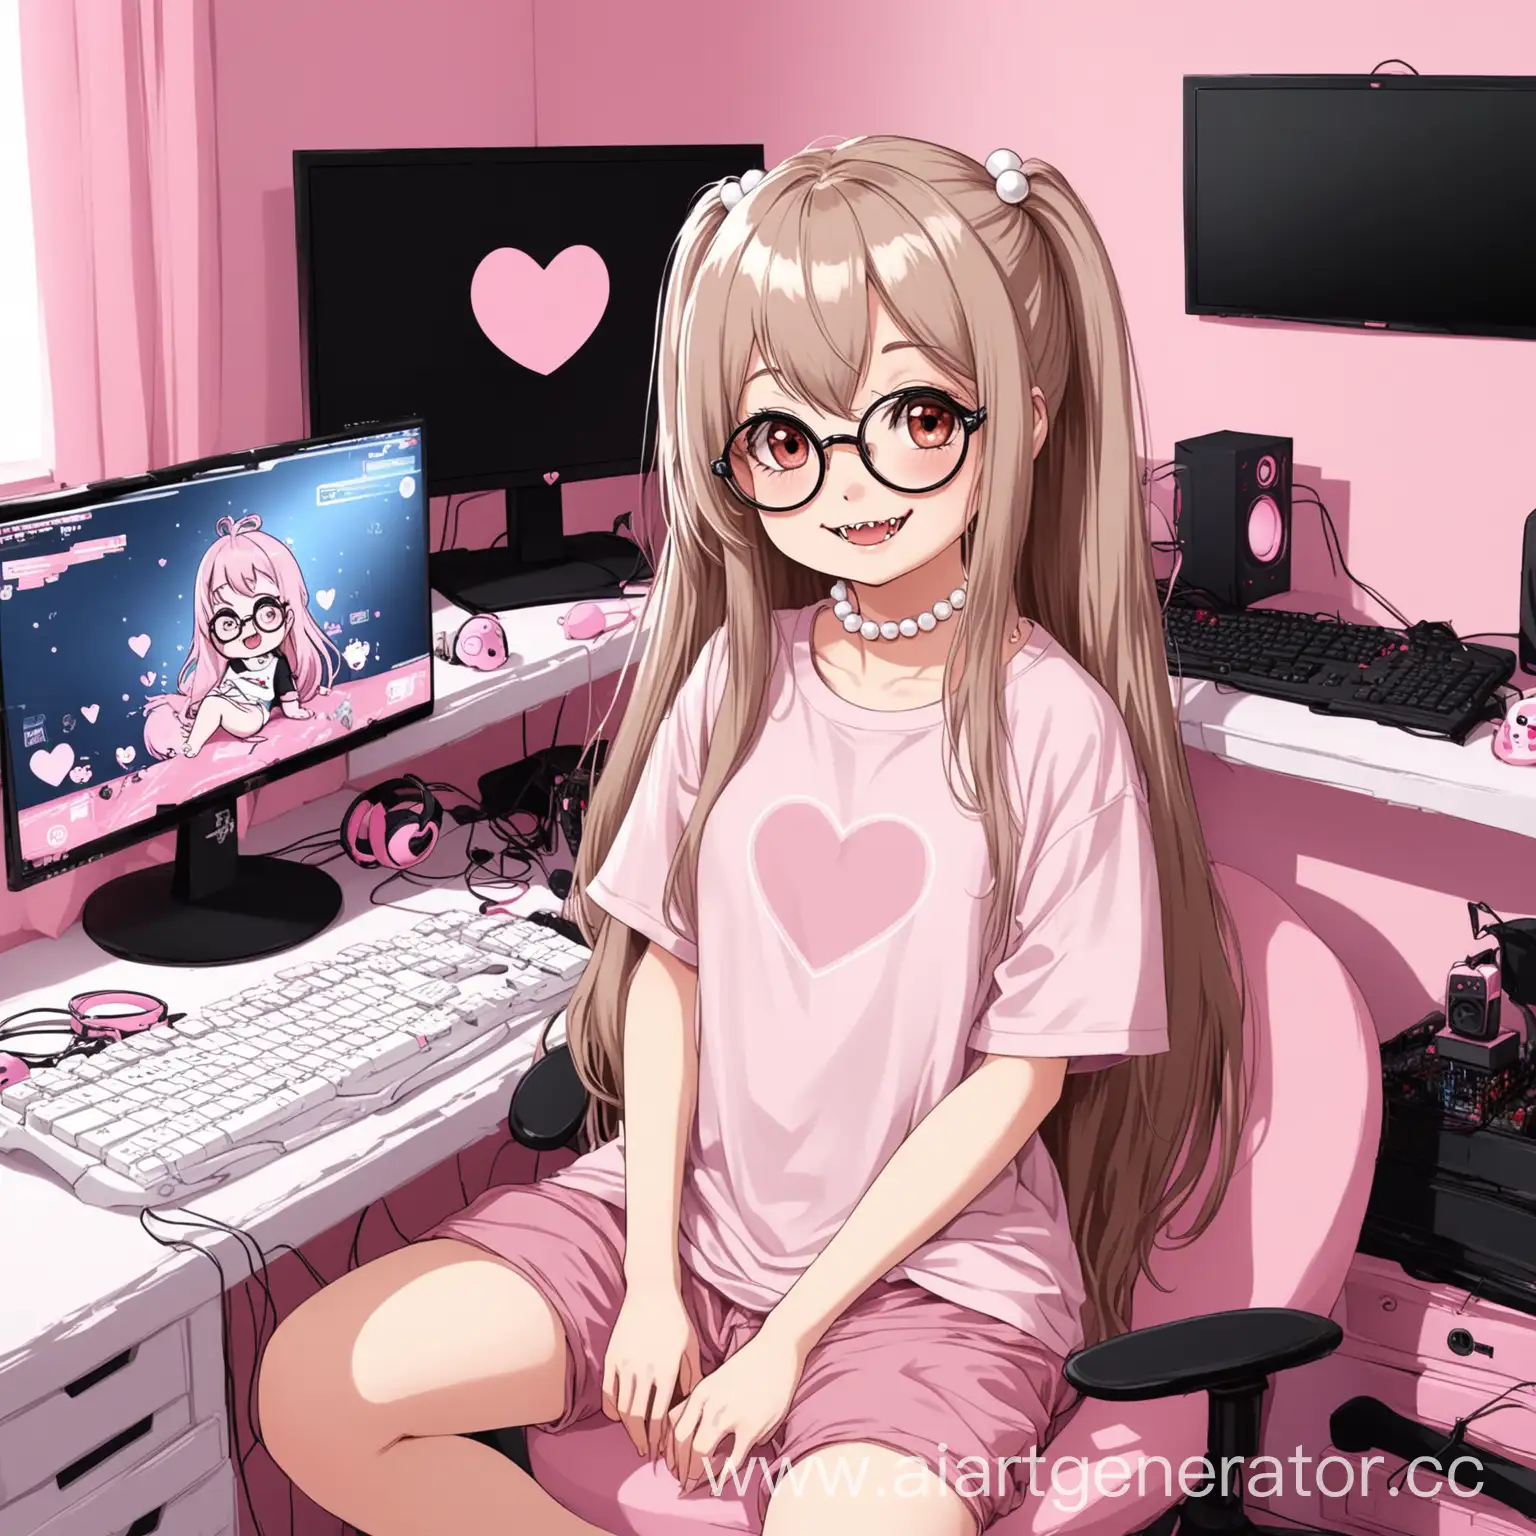 Cozy-Room-with-Computer-Gaming-Setup-Cute-Girl-with-Glasses-and-Heart-Choker-in-Pink-and-White